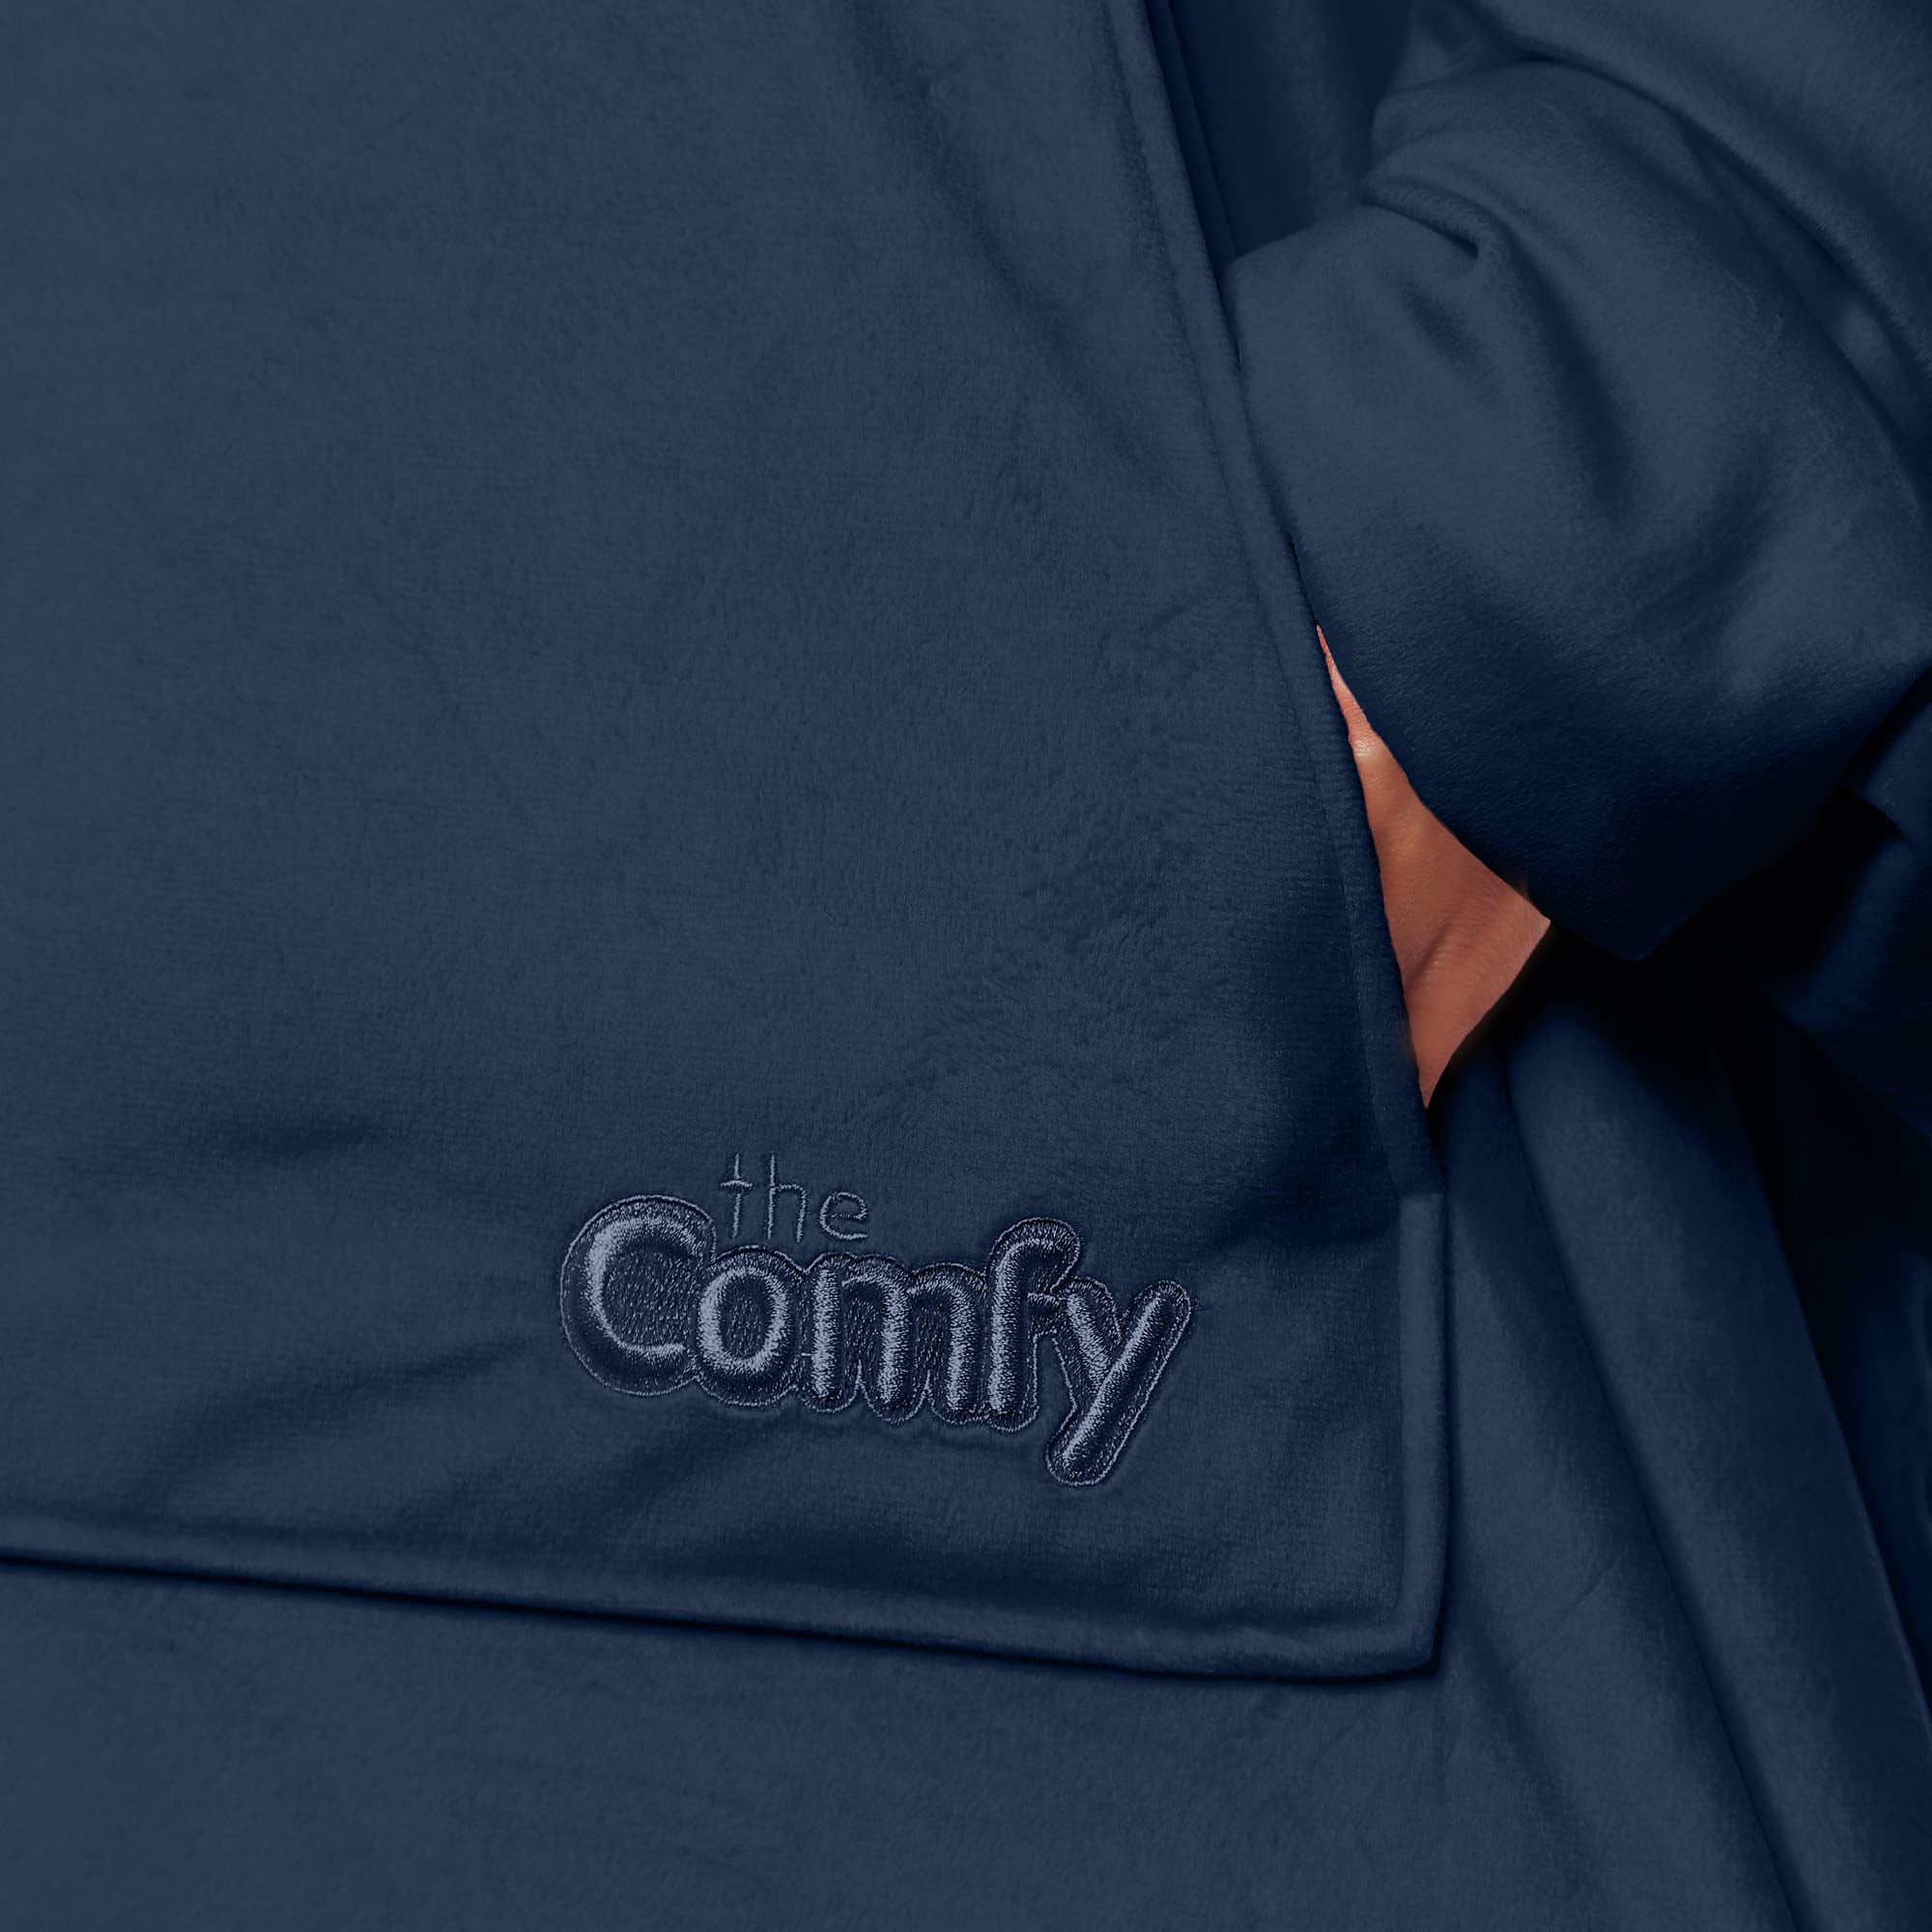 The Comfy – The Comfy Original Wearable Blanket